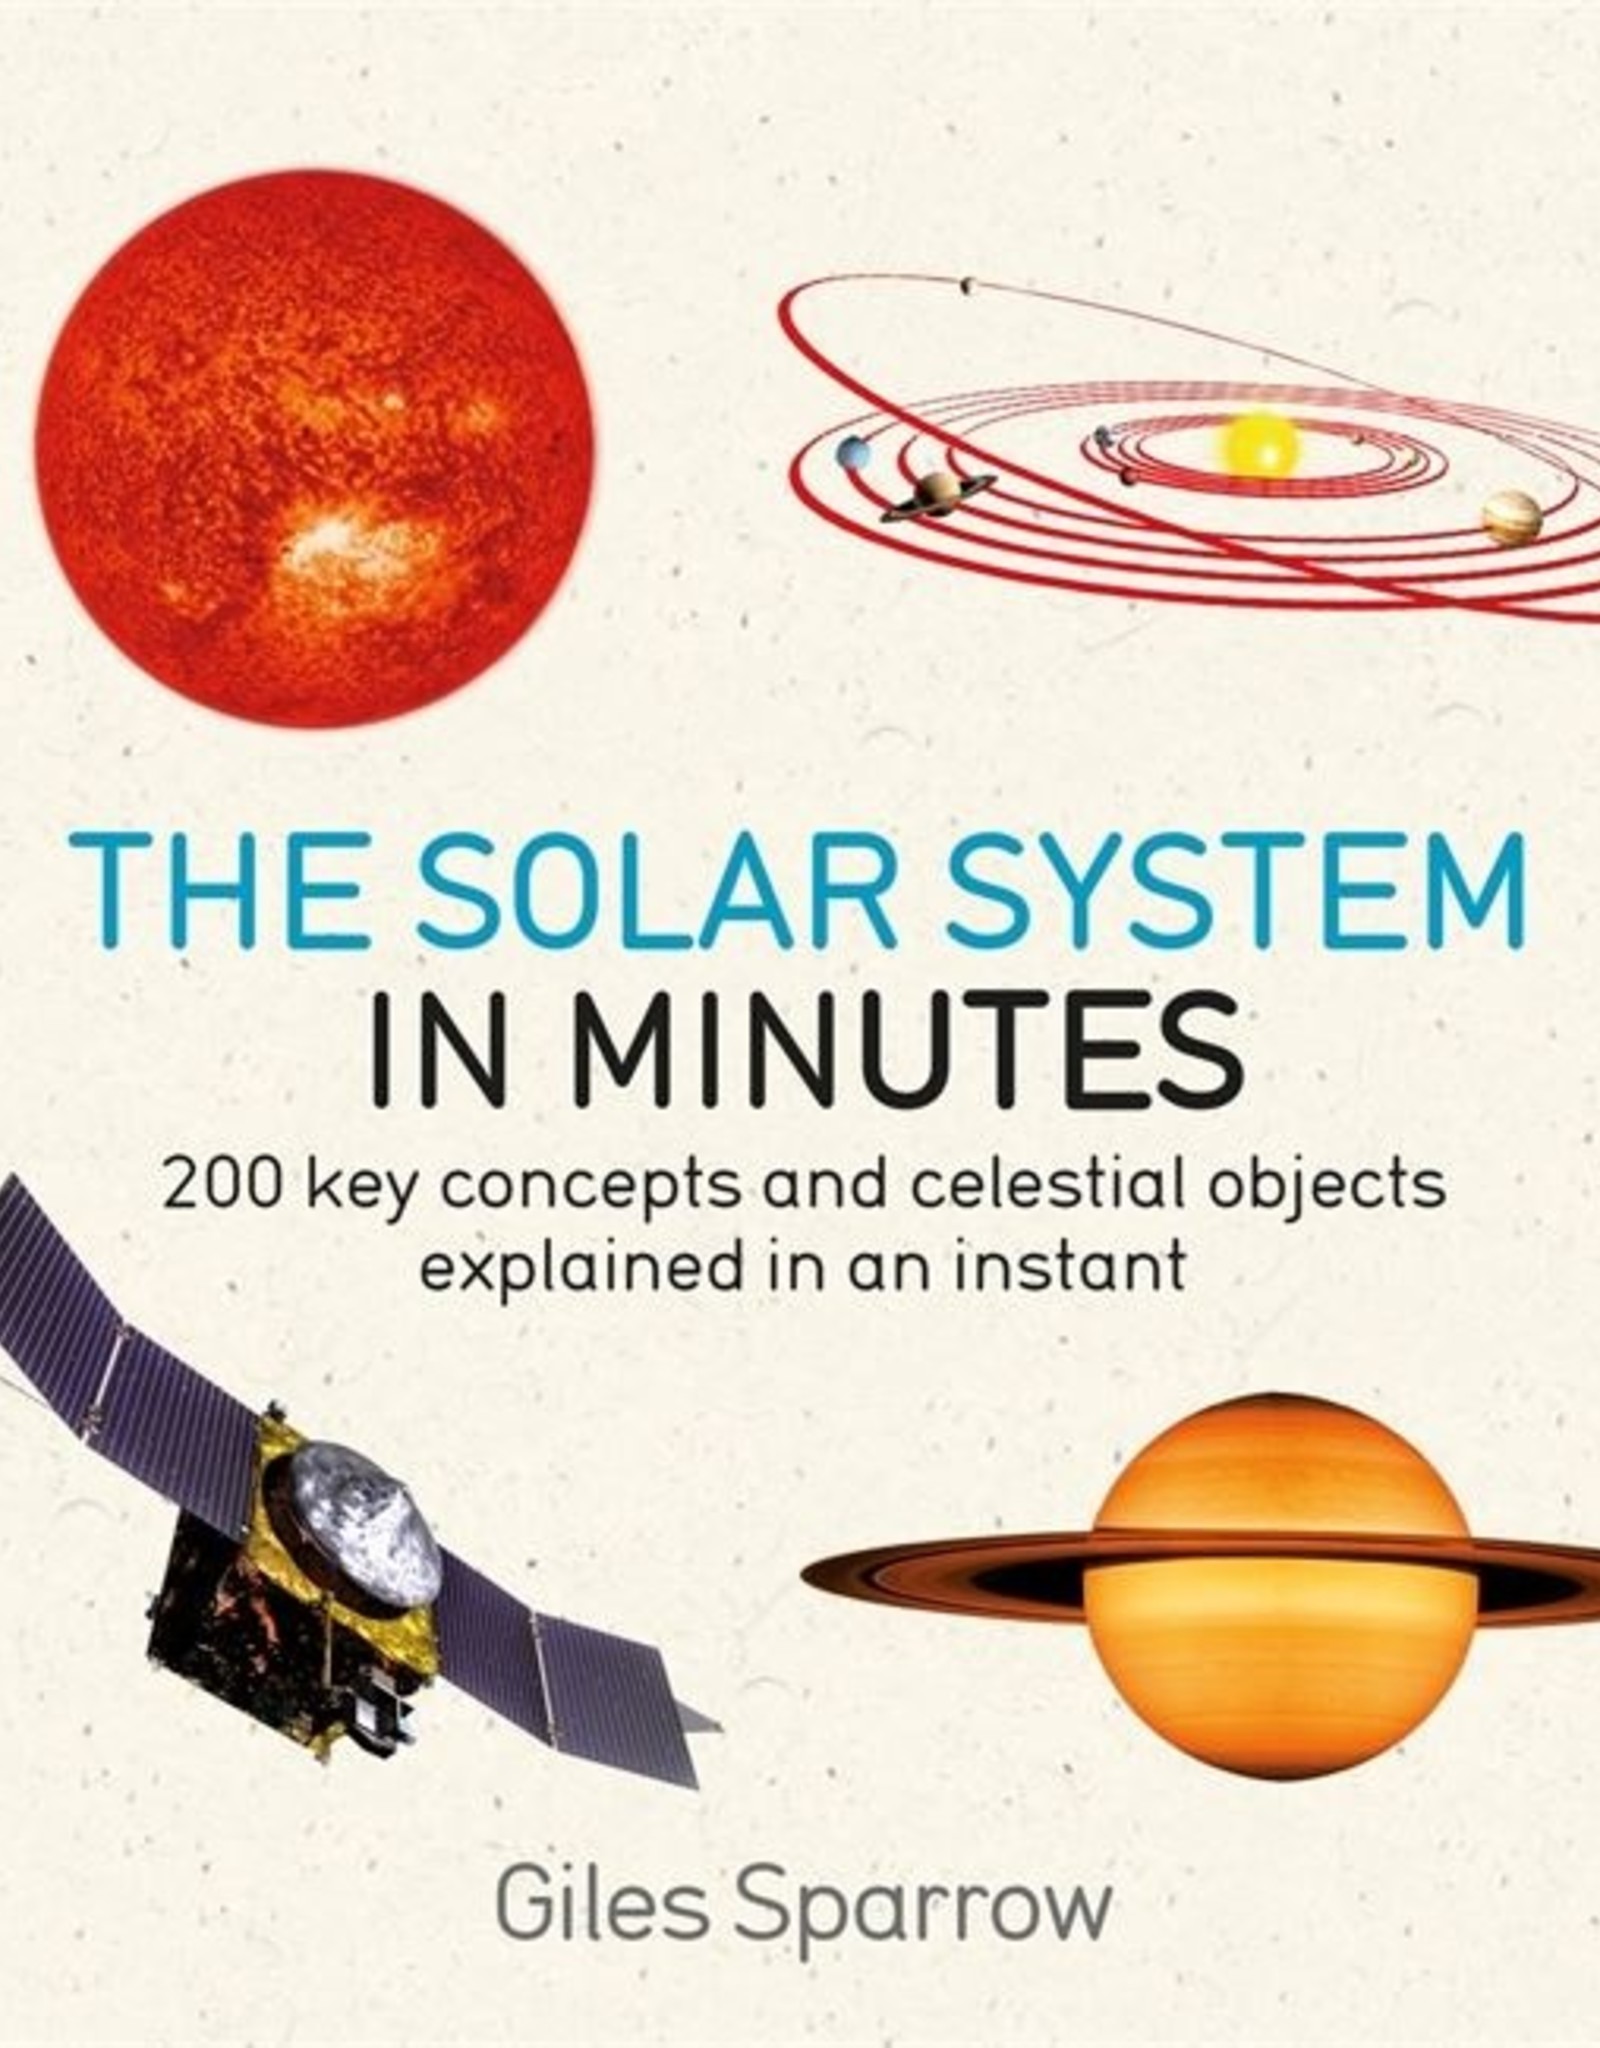 SOLAR SYSTEM IN MINUTES